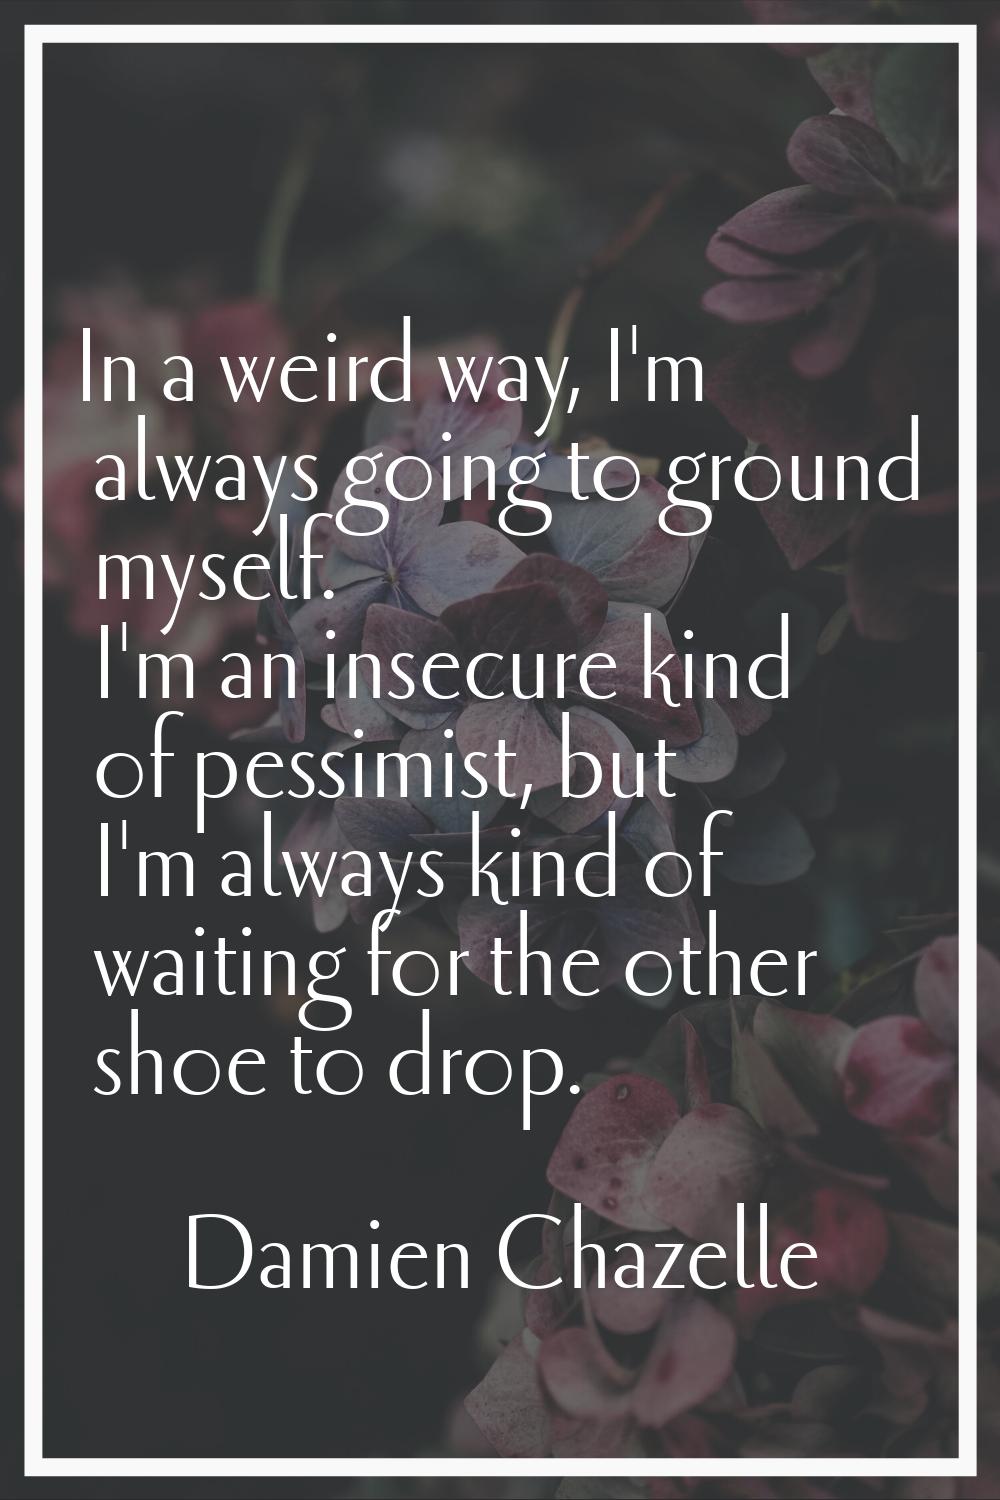 In a weird way, I'm always going to ground myself. I'm an insecure kind of pessimist, but I'm alway